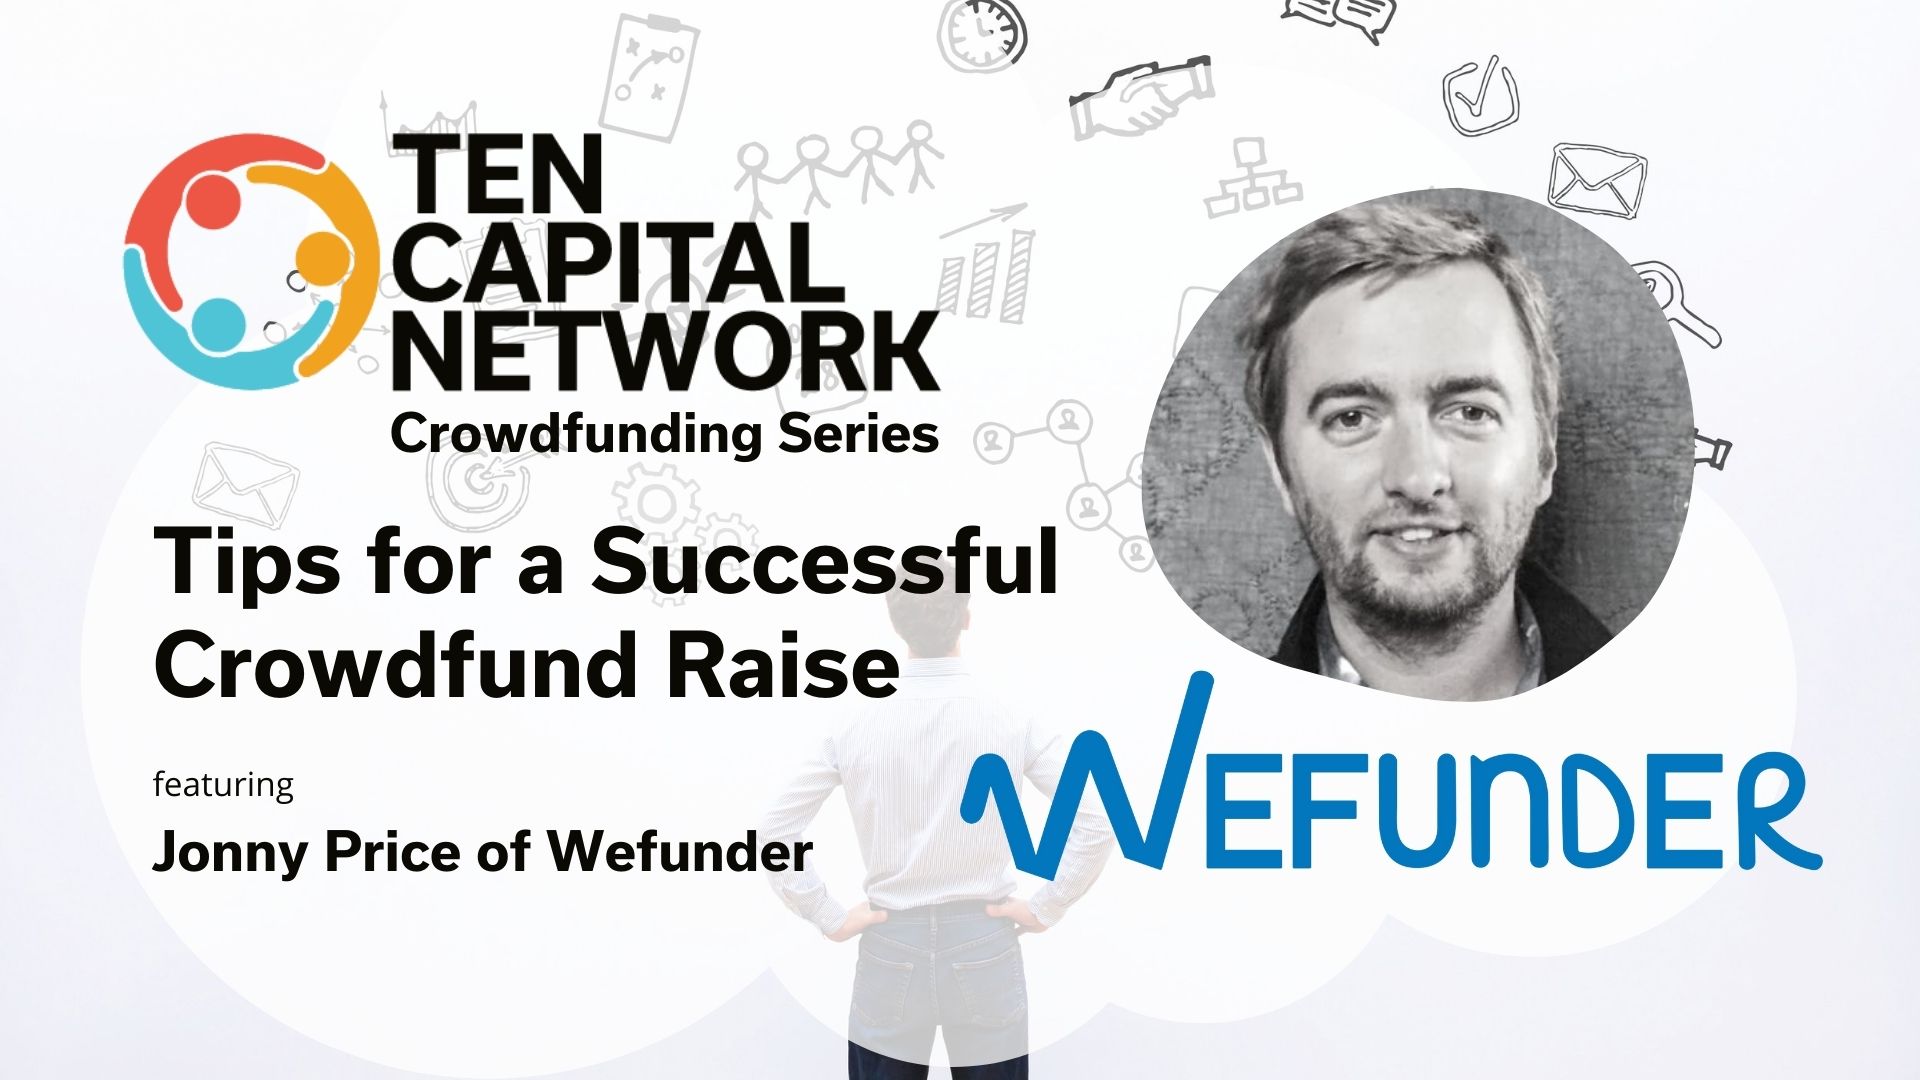 TEN Capital Crowdfunding Series:  Tips for a Successful Crowdfund Raise